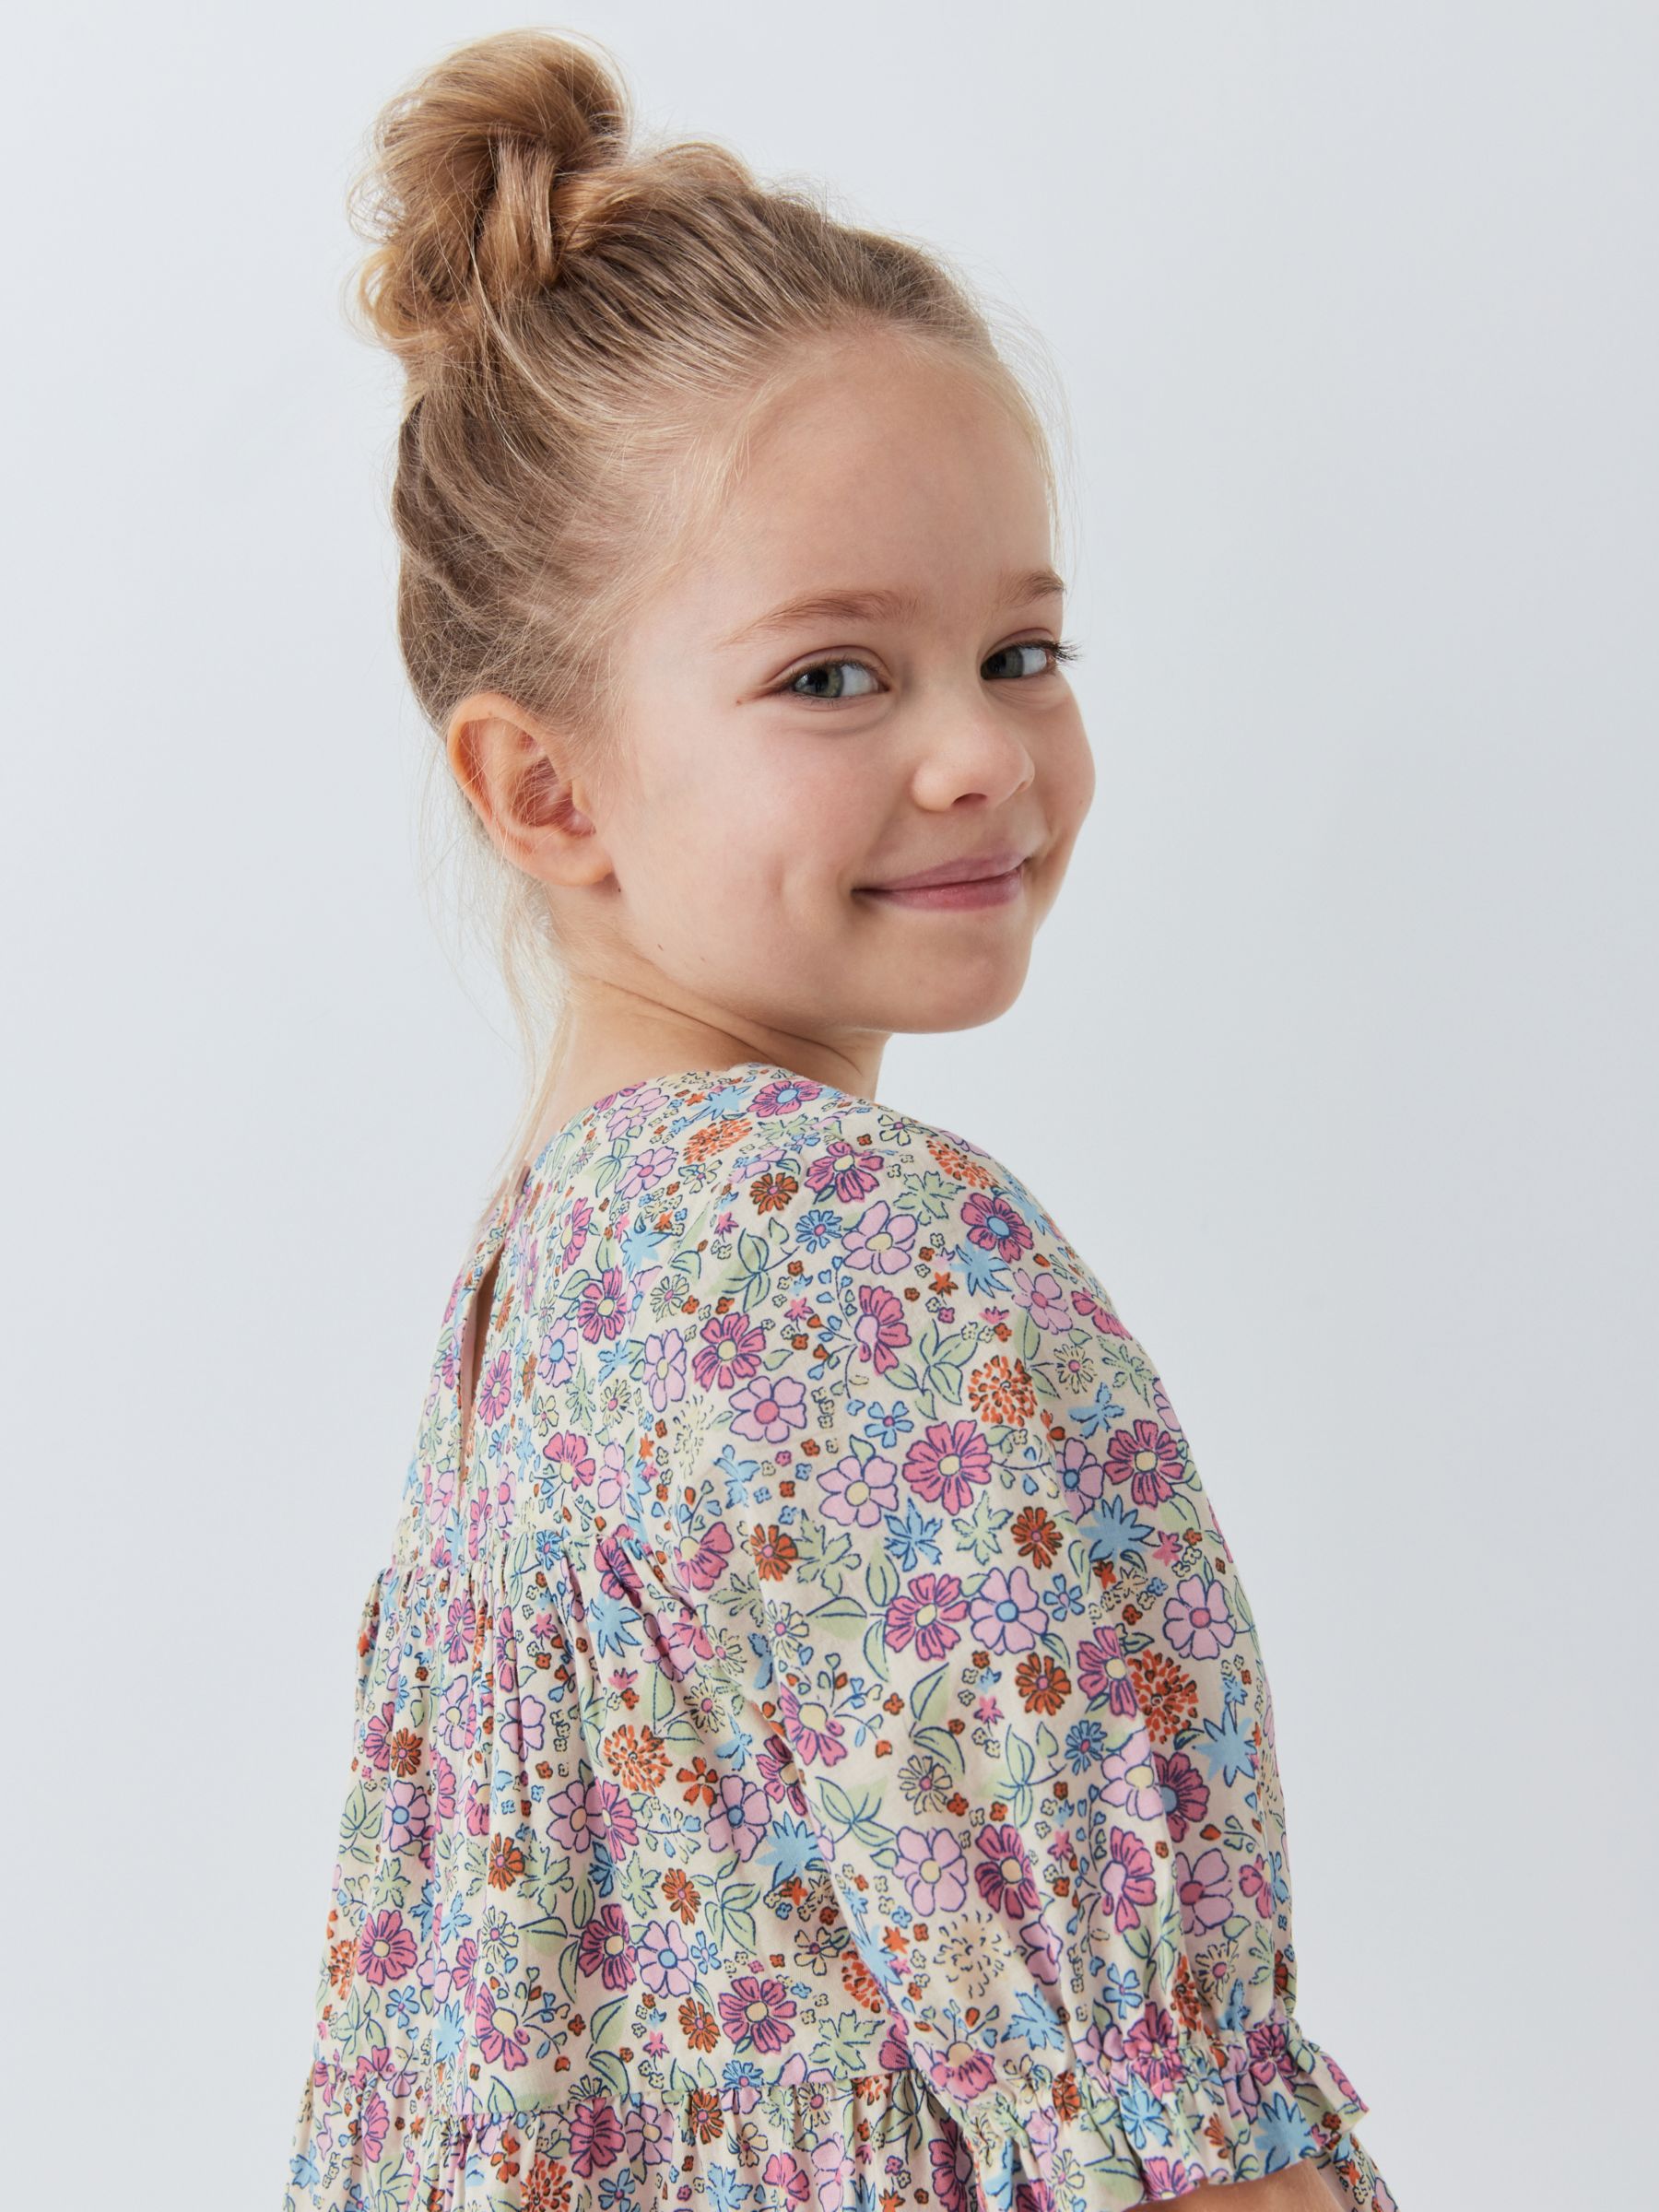 John Lewis Kids' Ditsy Floral Tiered Dress, Multi, 7 years